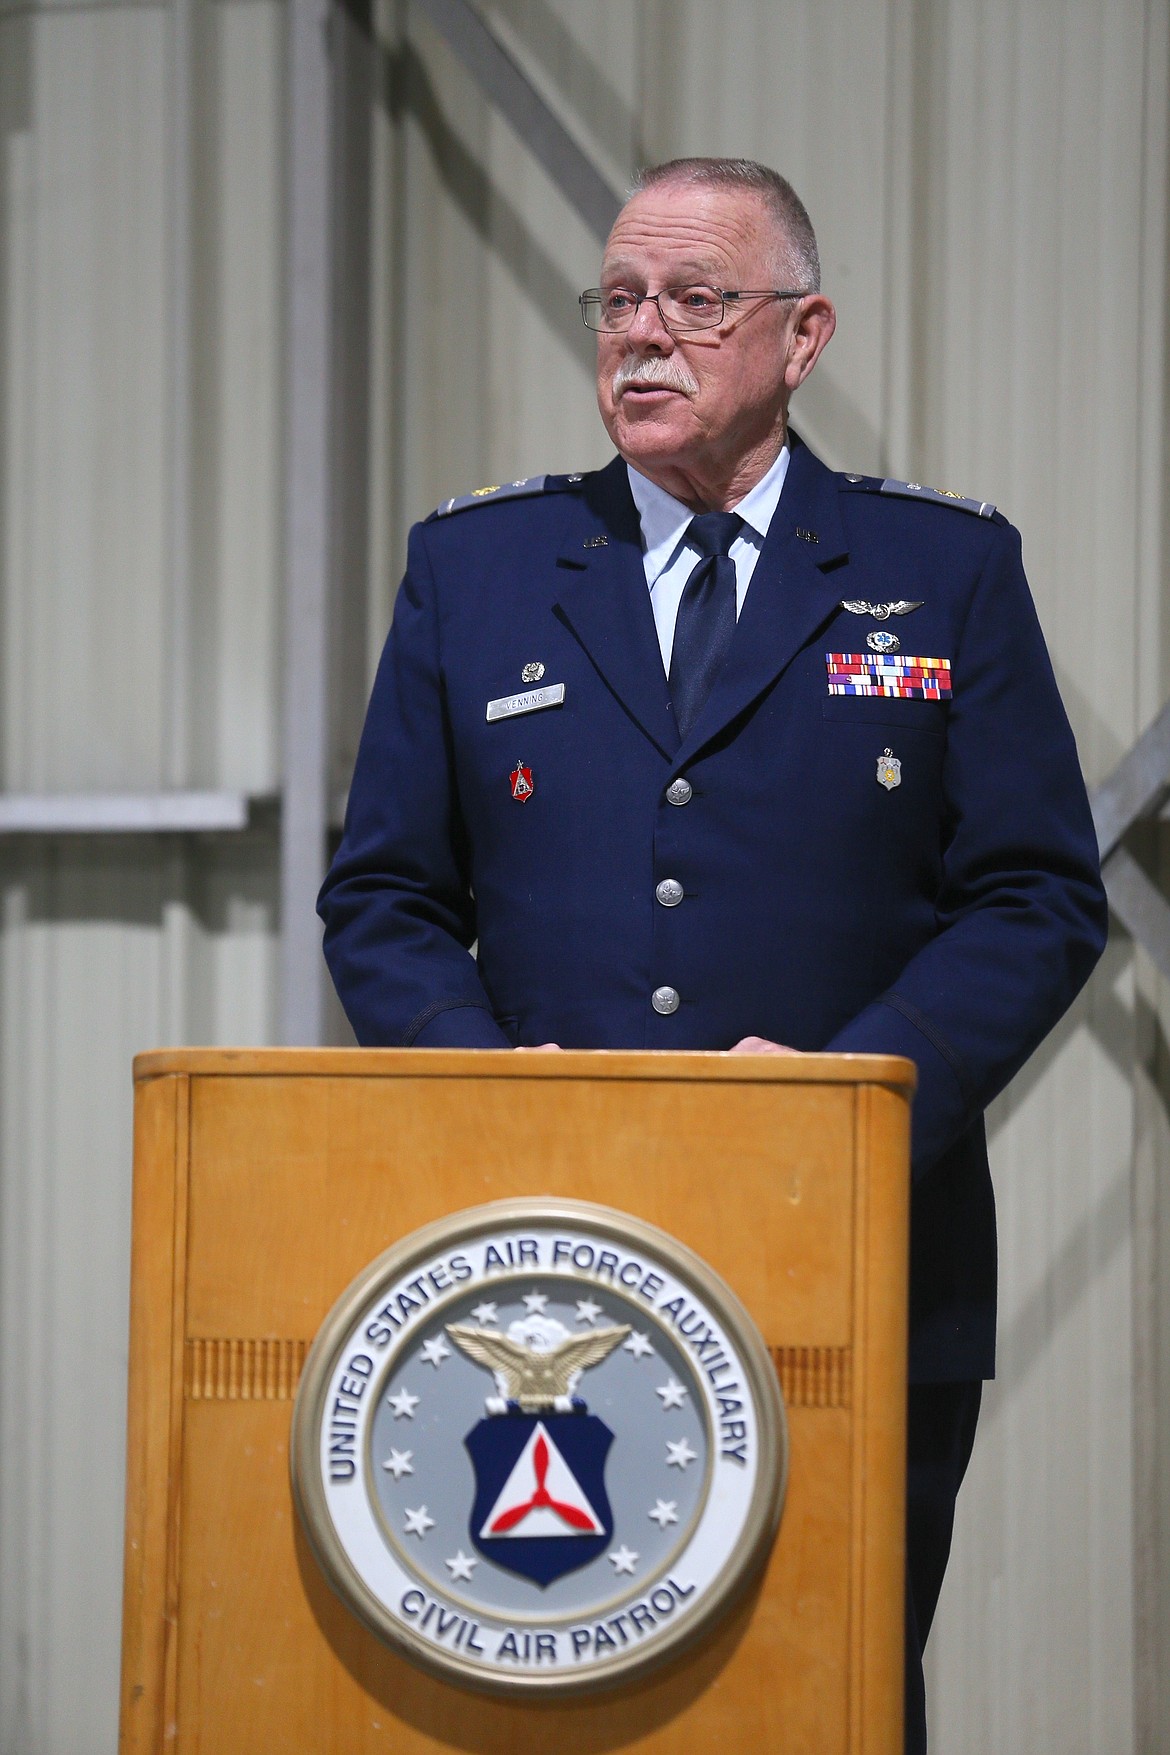 Outgoing Civil Air Patrol Coeur d'Alene Composite Squadron Commander Maj. Michael Venning delivers a farewell speech Tuesday night during a change of command ceremony in the squadron hangar at Pappy Boyington Field in Hayden. Venning will go on to be the Idaho Wing director of logistics.